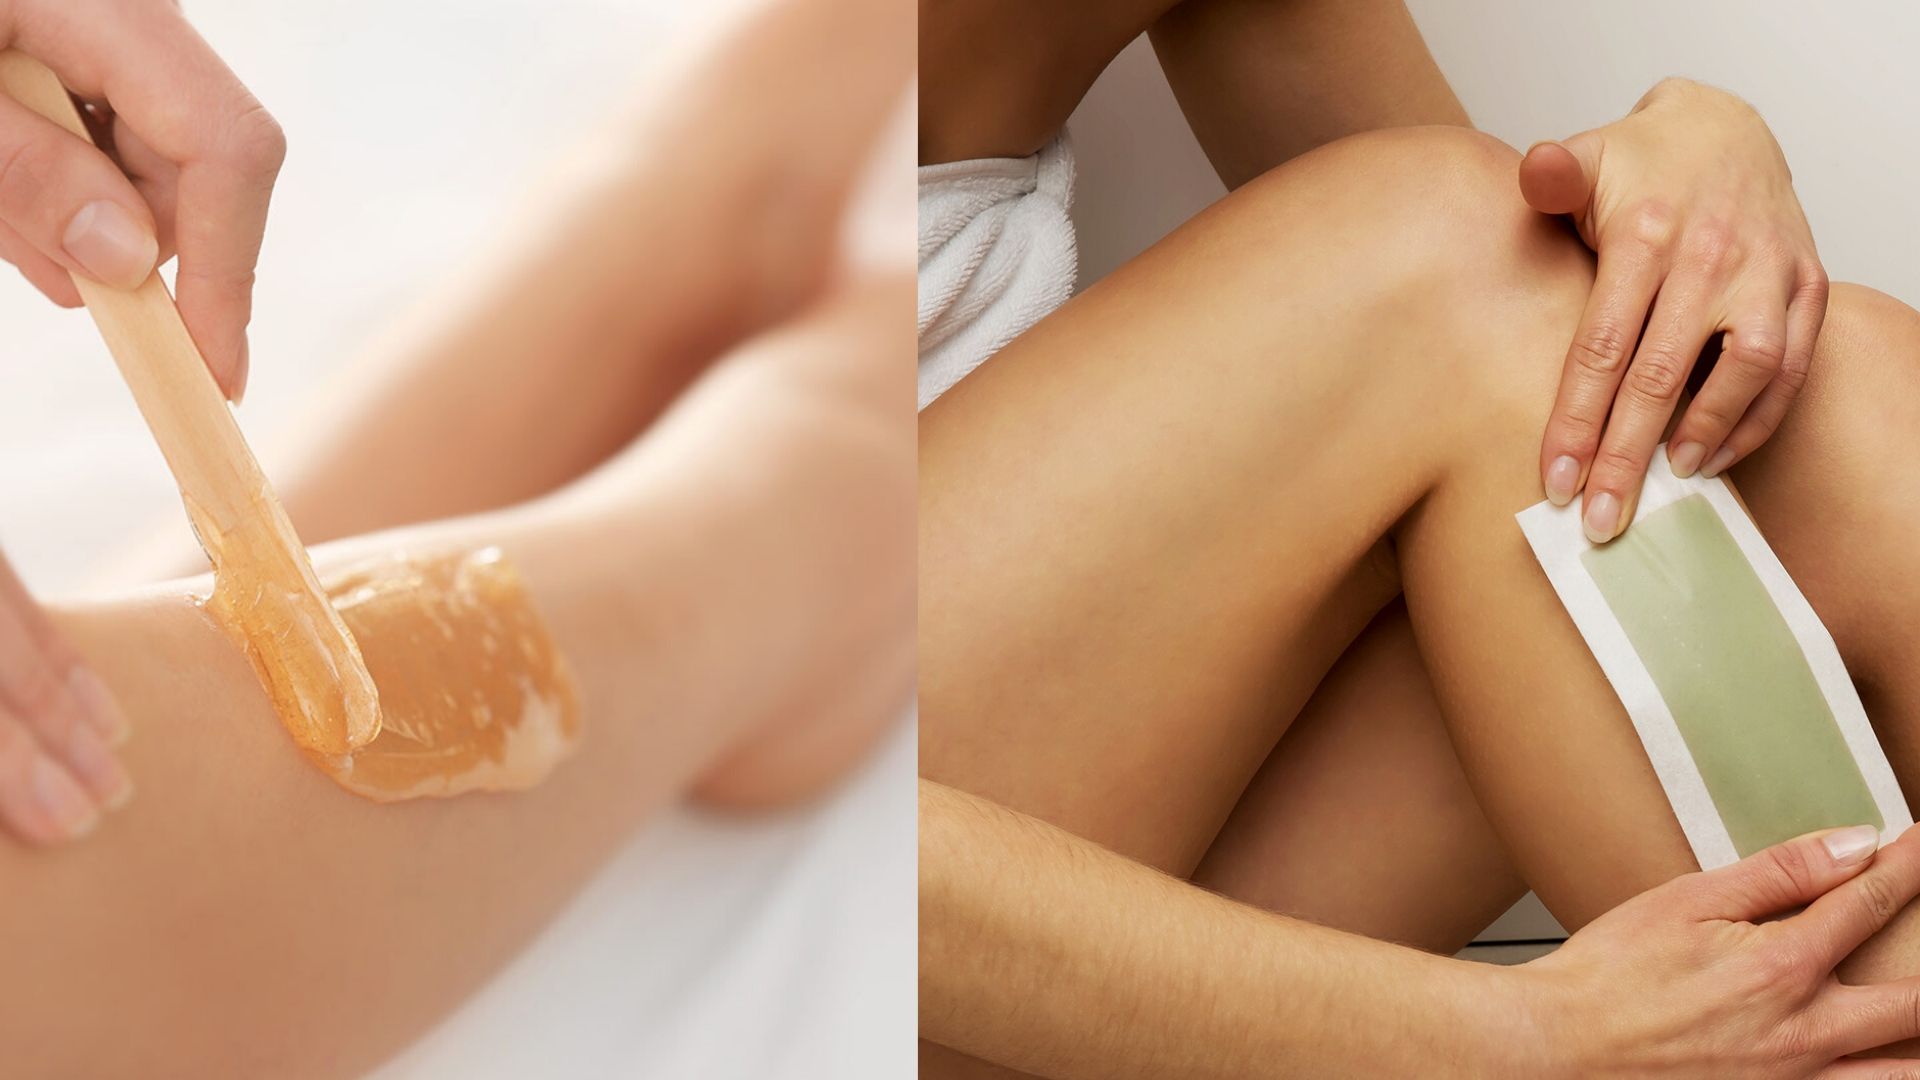 What is Waxing, Waxing Tips for Women, Home Waxing Tips, Legs, Arms